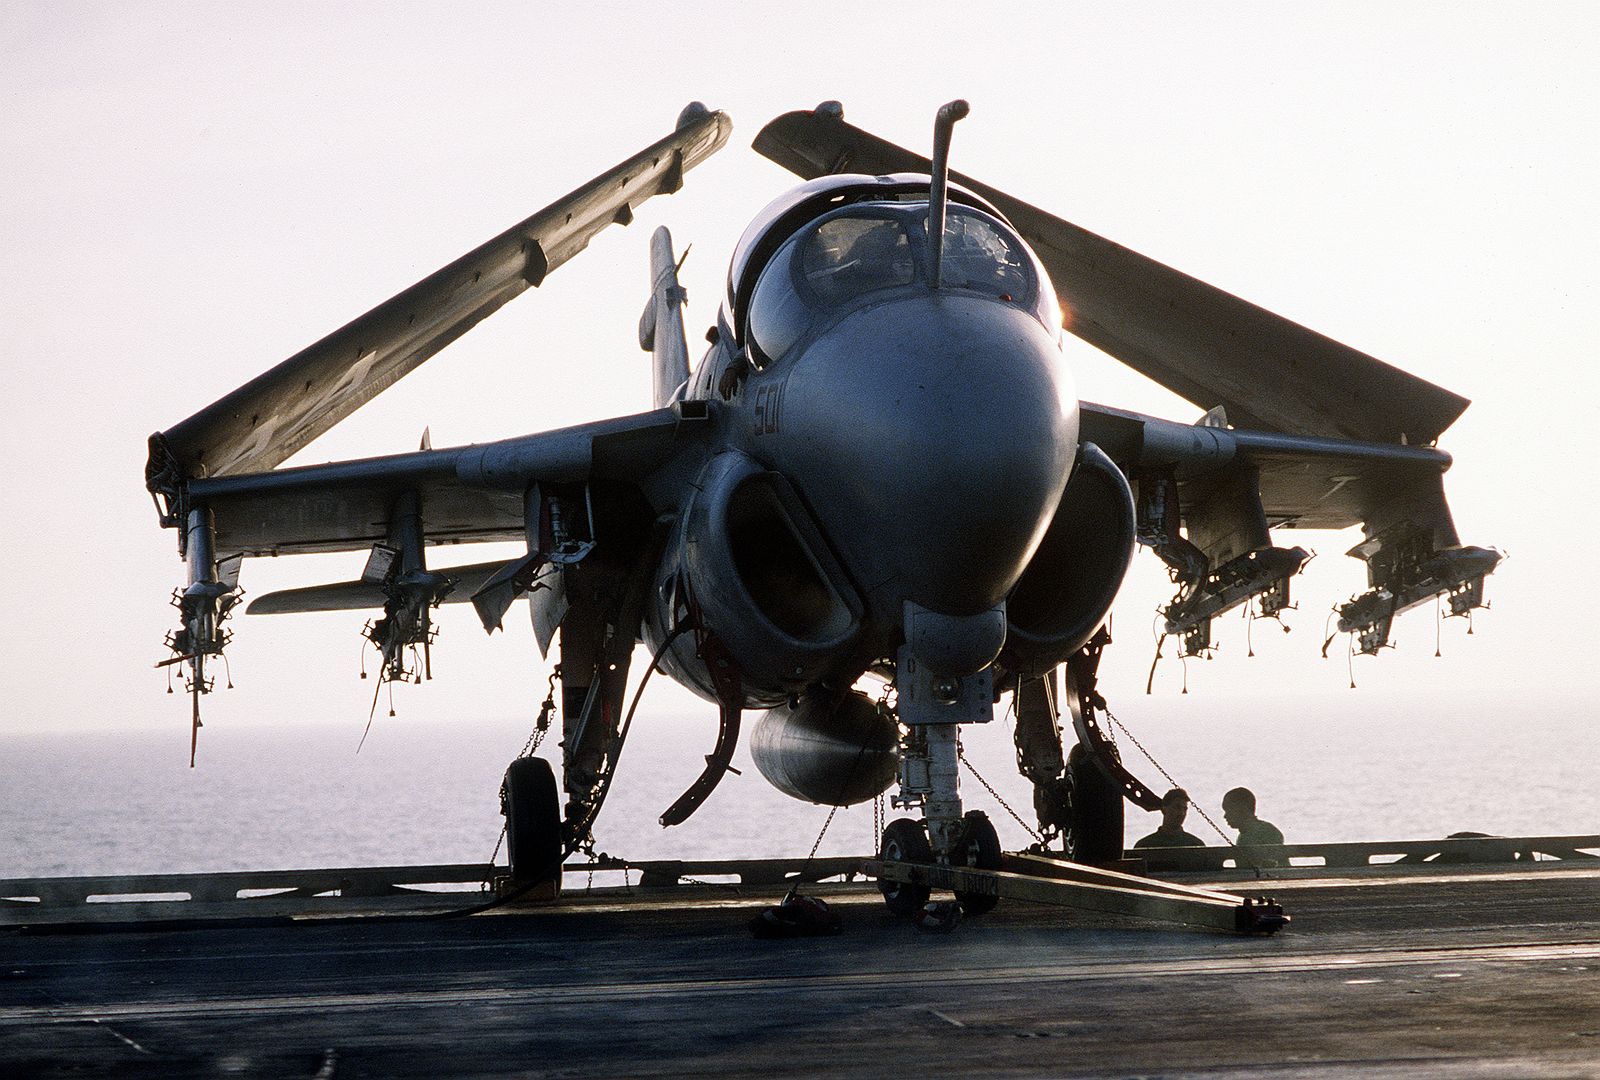 An Attack Squadron 35 A 6E Intruder Aircraft Sits On The Flight Deck Of The Aircraft Carrier USS SARATOGA During Operation Desert Storm